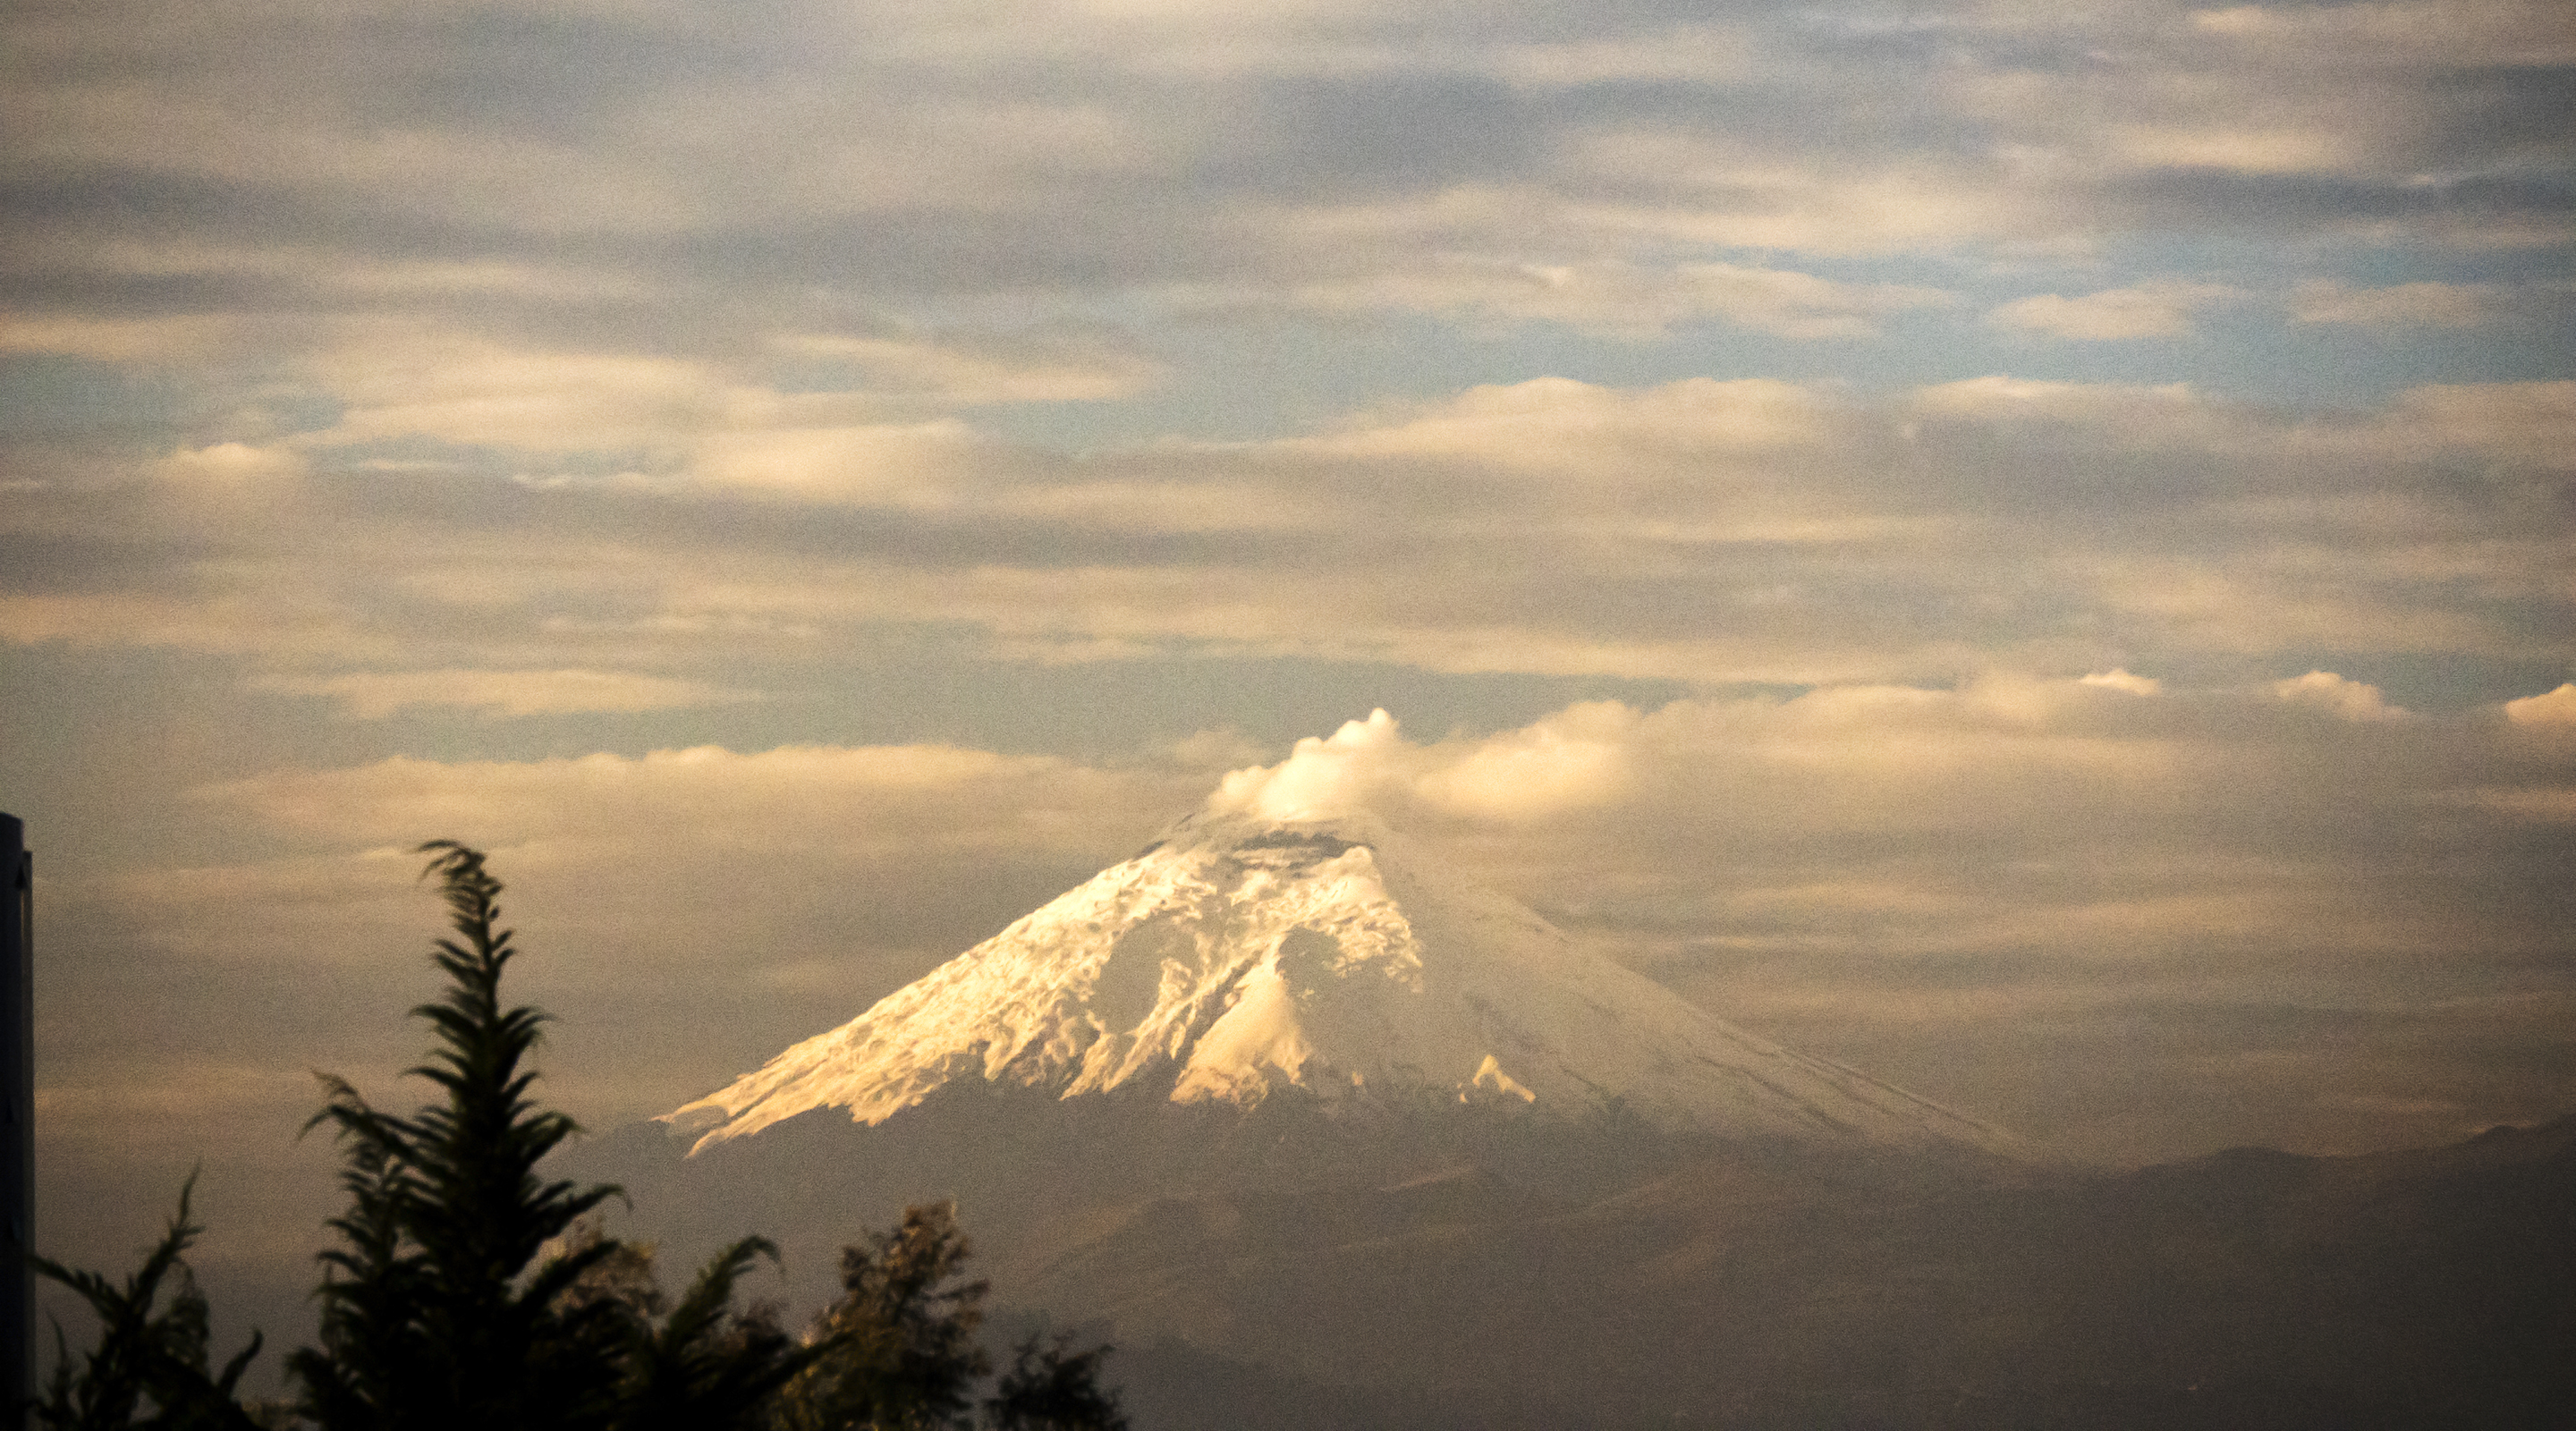 First morning light falls on an erupting Cotopaxi volcano.